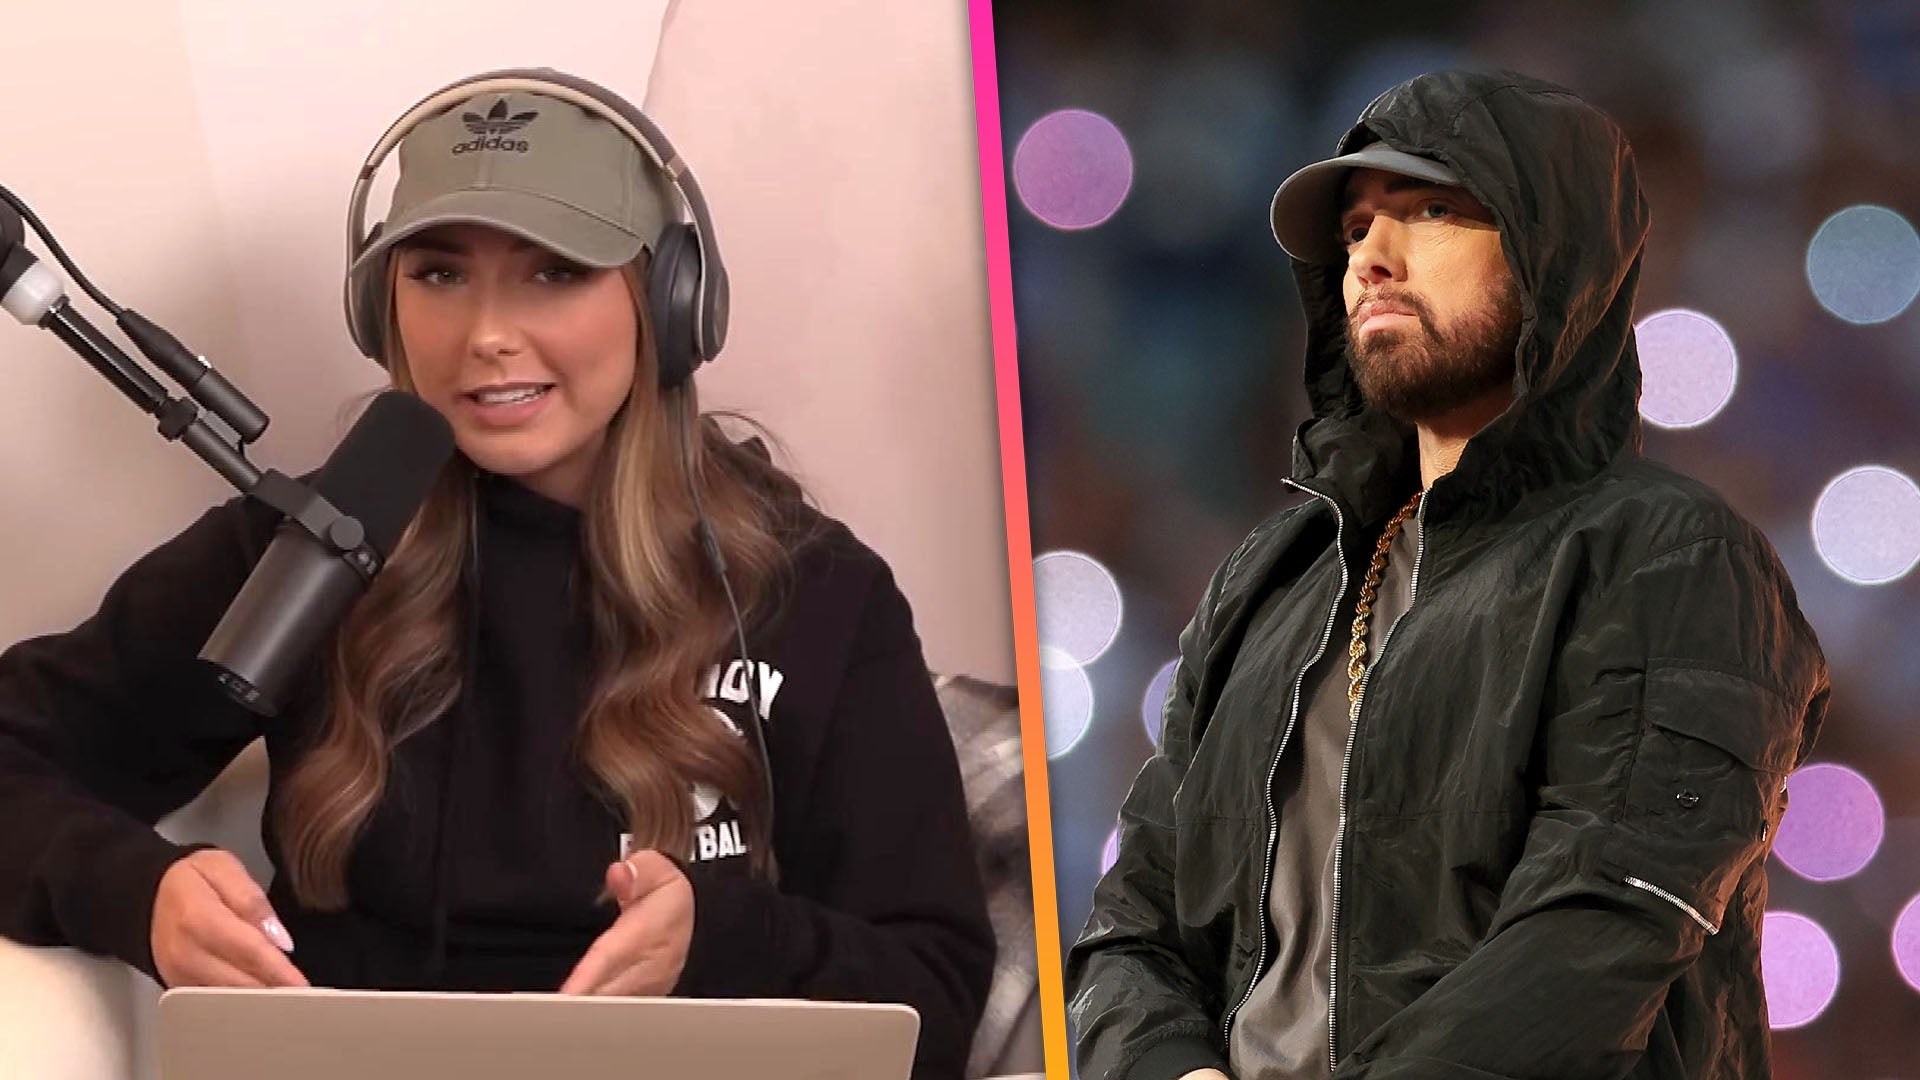 Why Eminem's Daughter Hailie Jade Feels Bothered When Asked About Her Dad